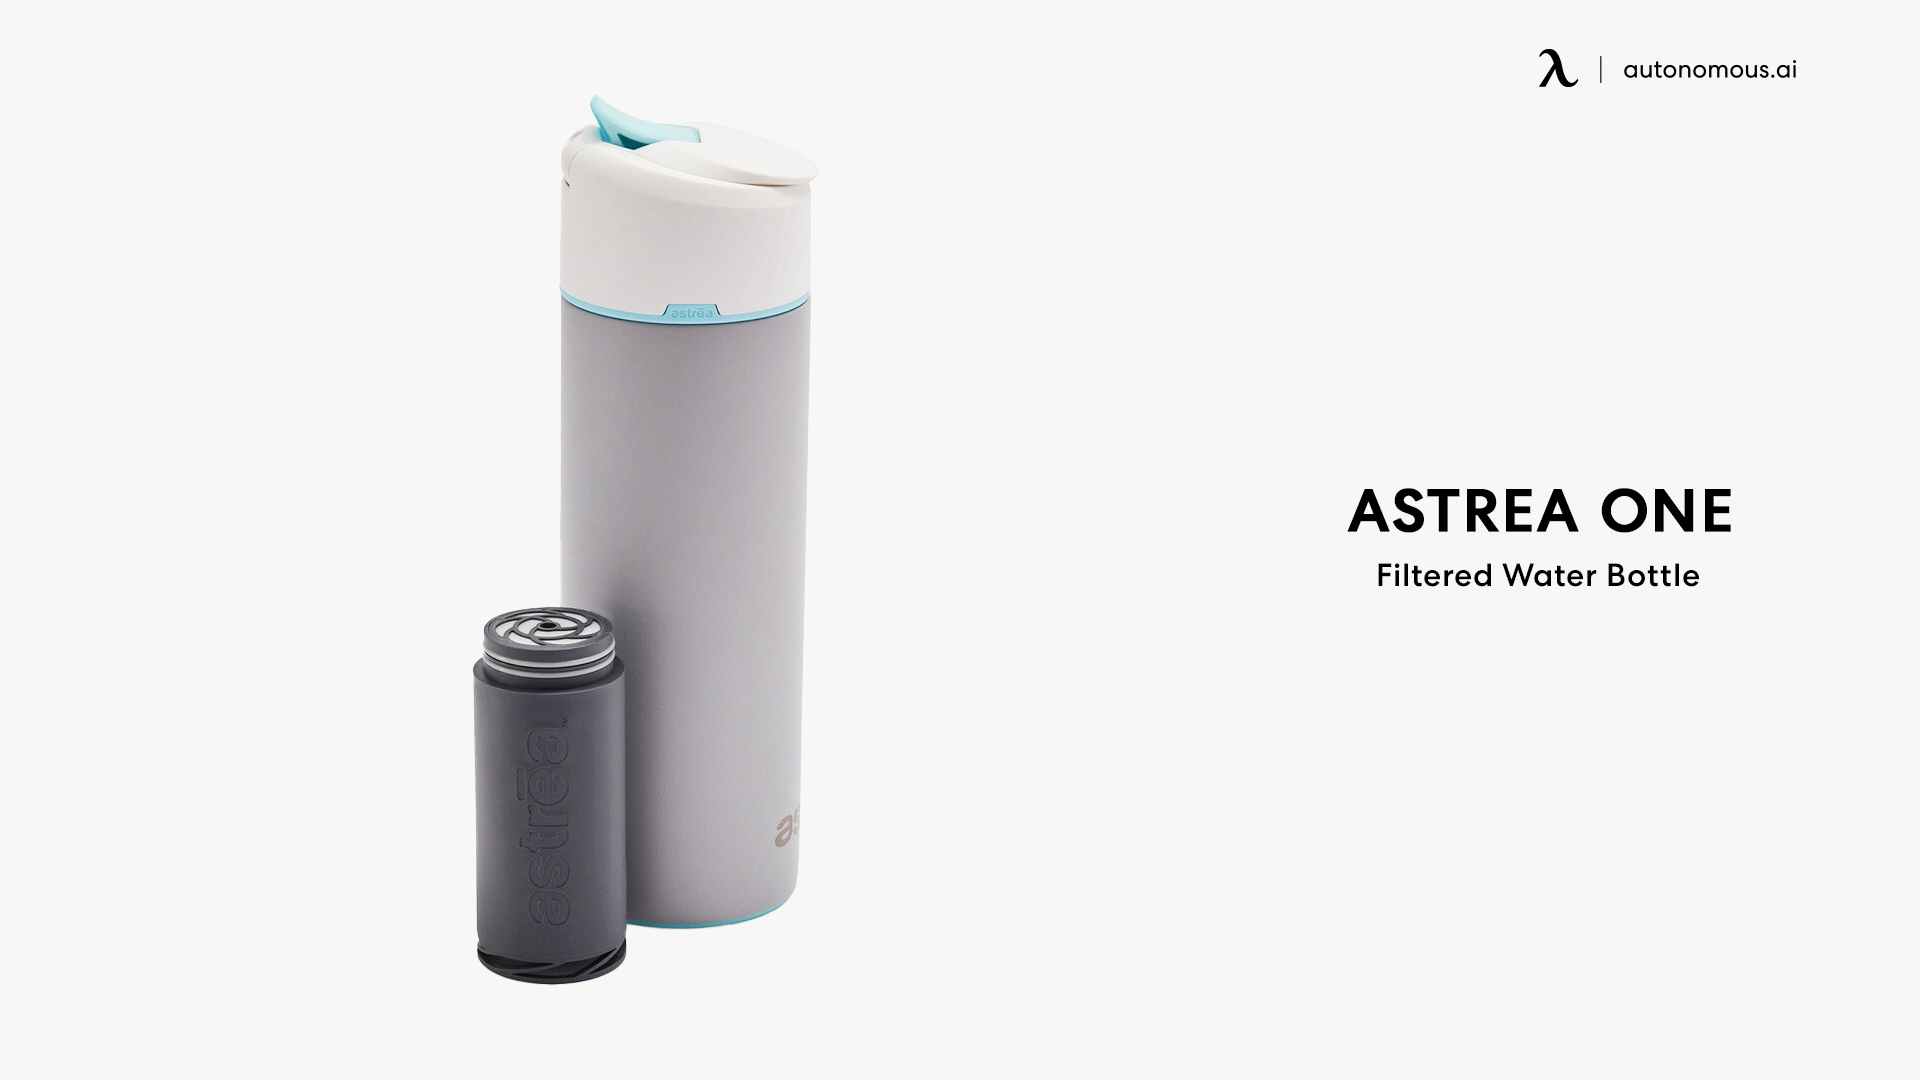 Astrea One Filtered Water Bottle self-cleaning water bottle